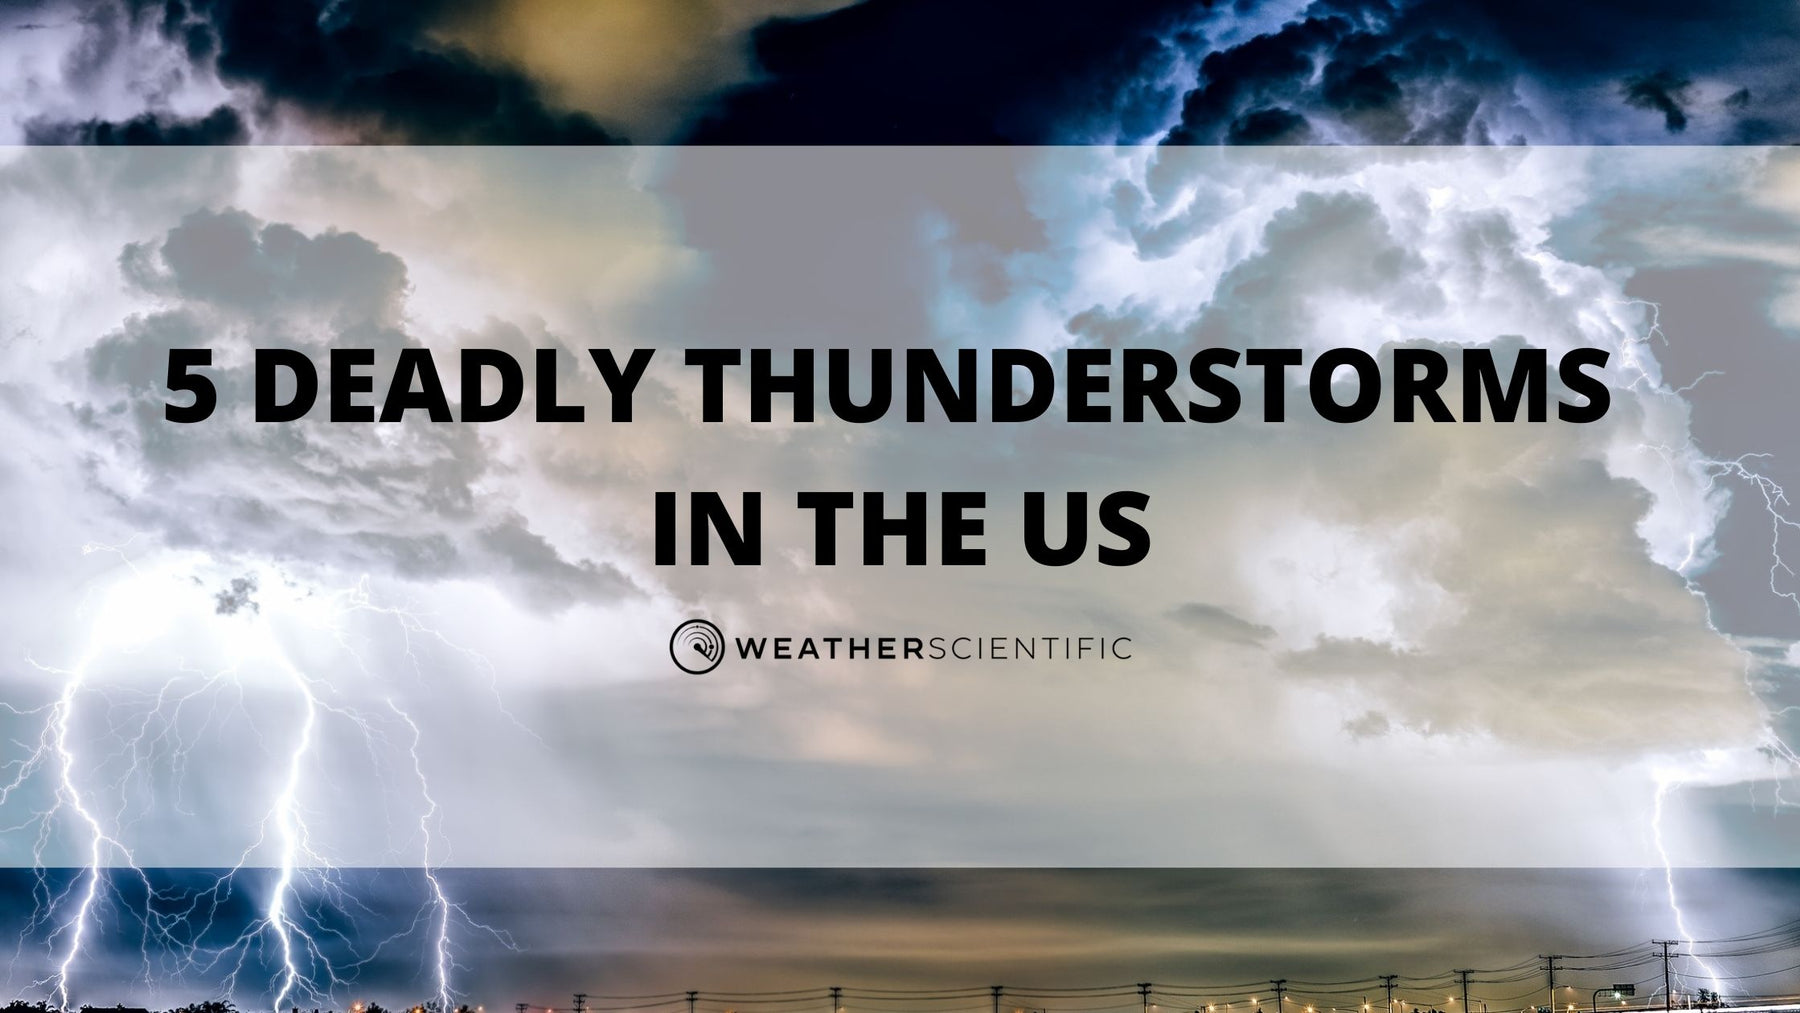 5 Deadly Thunderstorms in the US